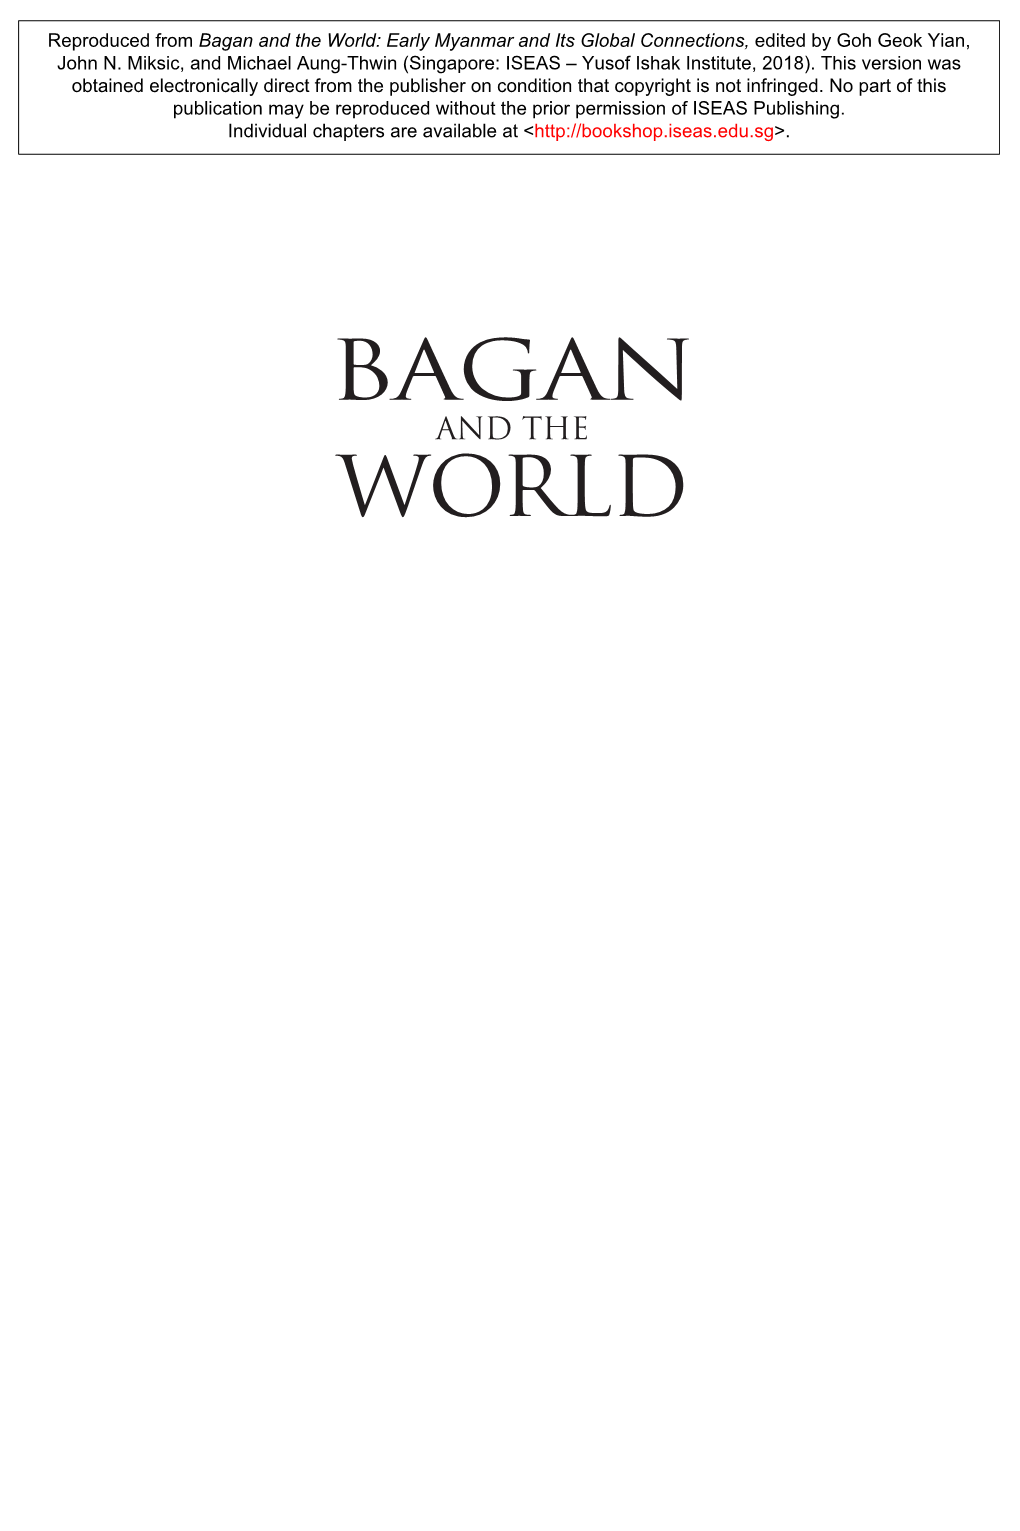 Bagan and the World: Early Myanmar and Its Global Connections